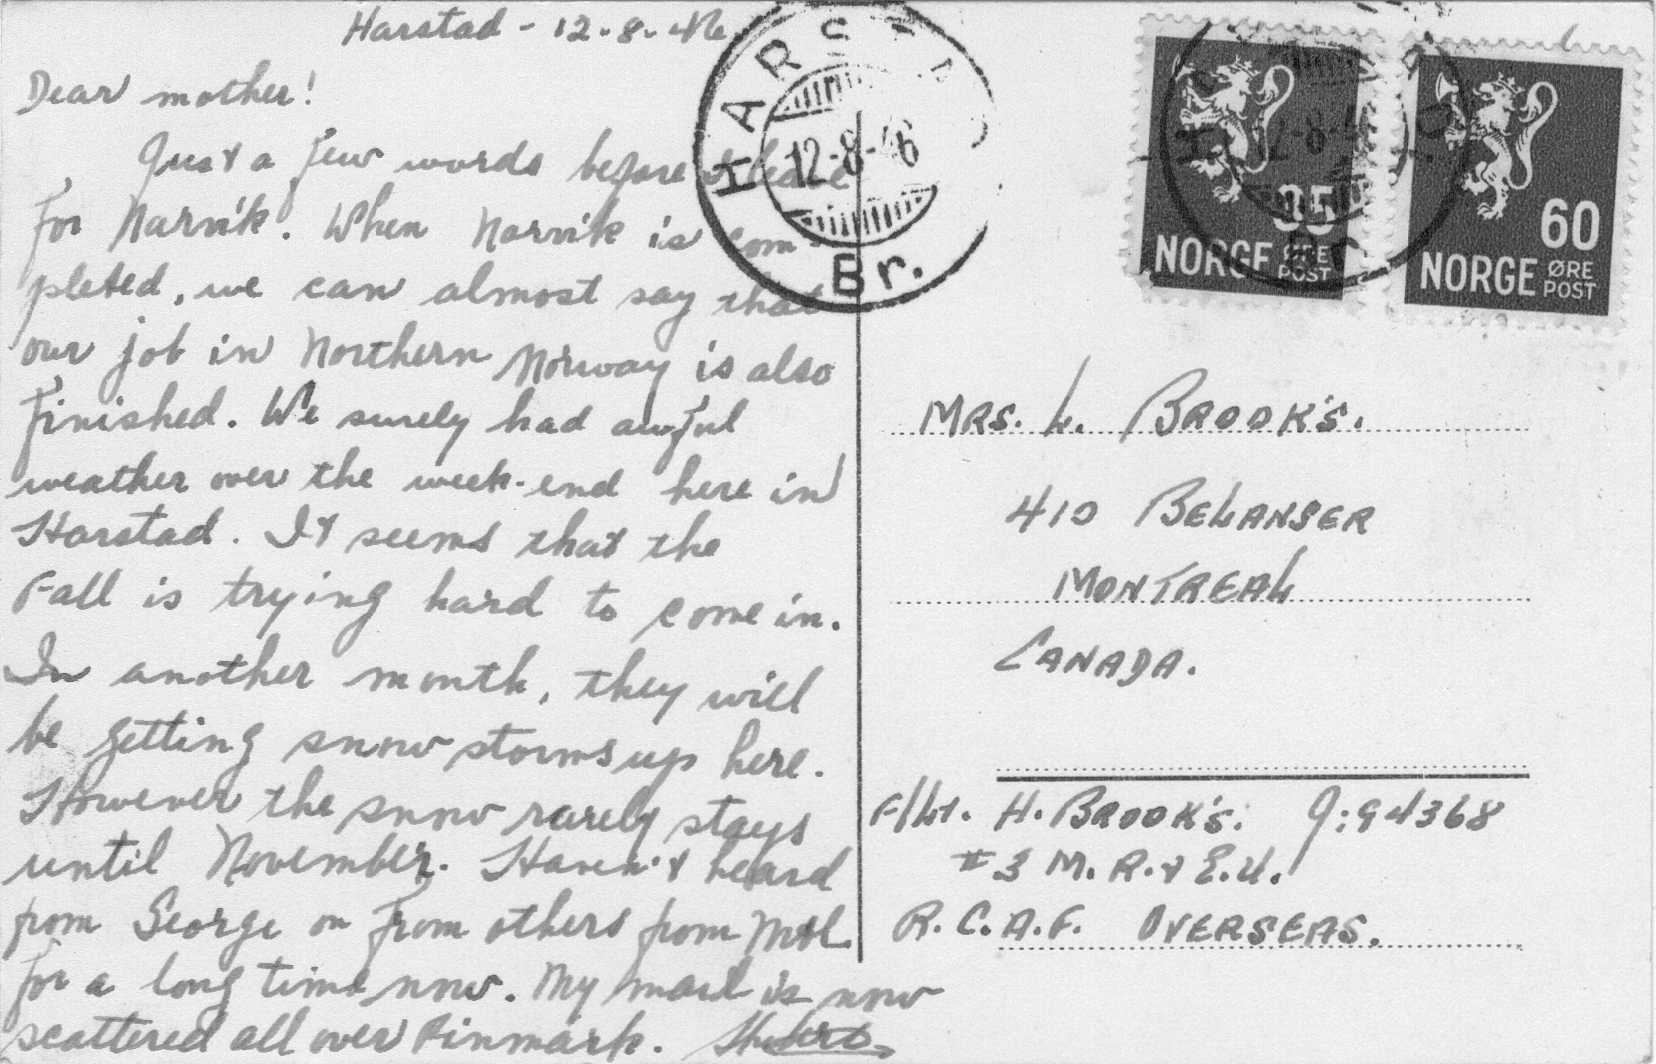 Hubert Brooks POSTCARD text to his mother from Harstad Norway